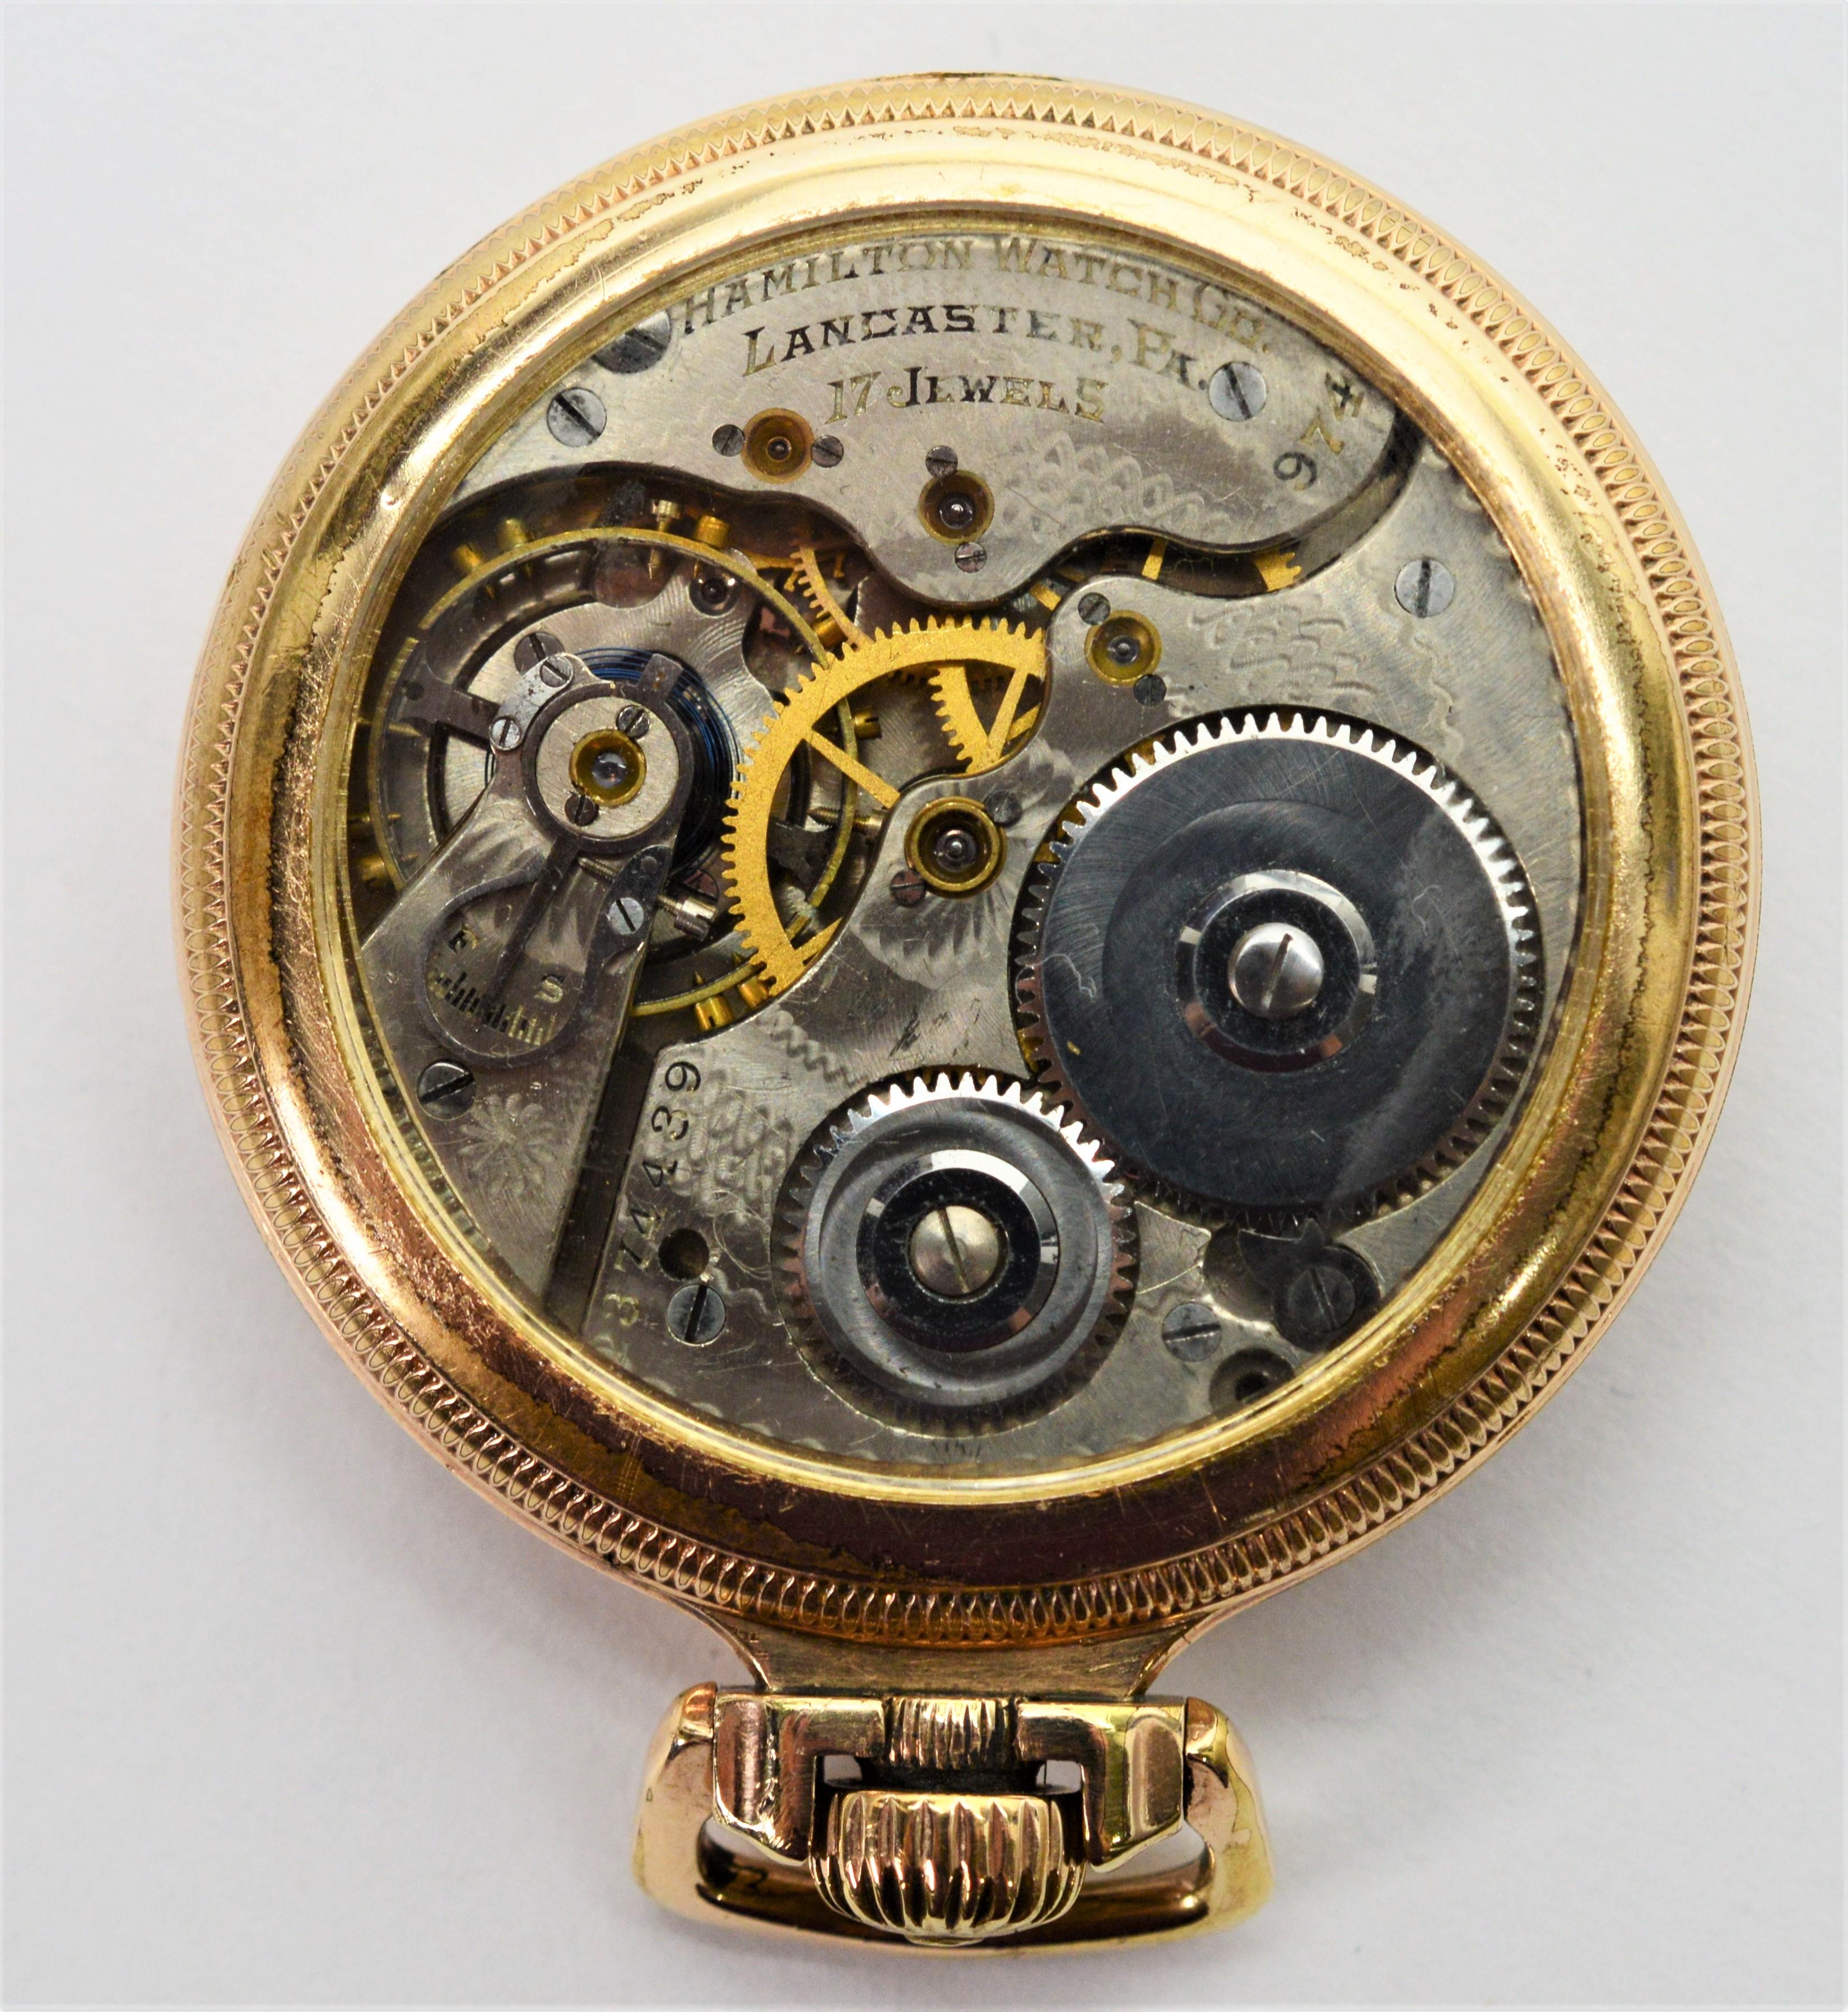 Enjoy owning this heirloom circa 1925 Hamilton Railroad Style Pocket Watch. Set in a brass case with gold plating, this fabulous size 16S American made piece is restored with a display back for a mesmerizing view of its beautiful fancy acid etched